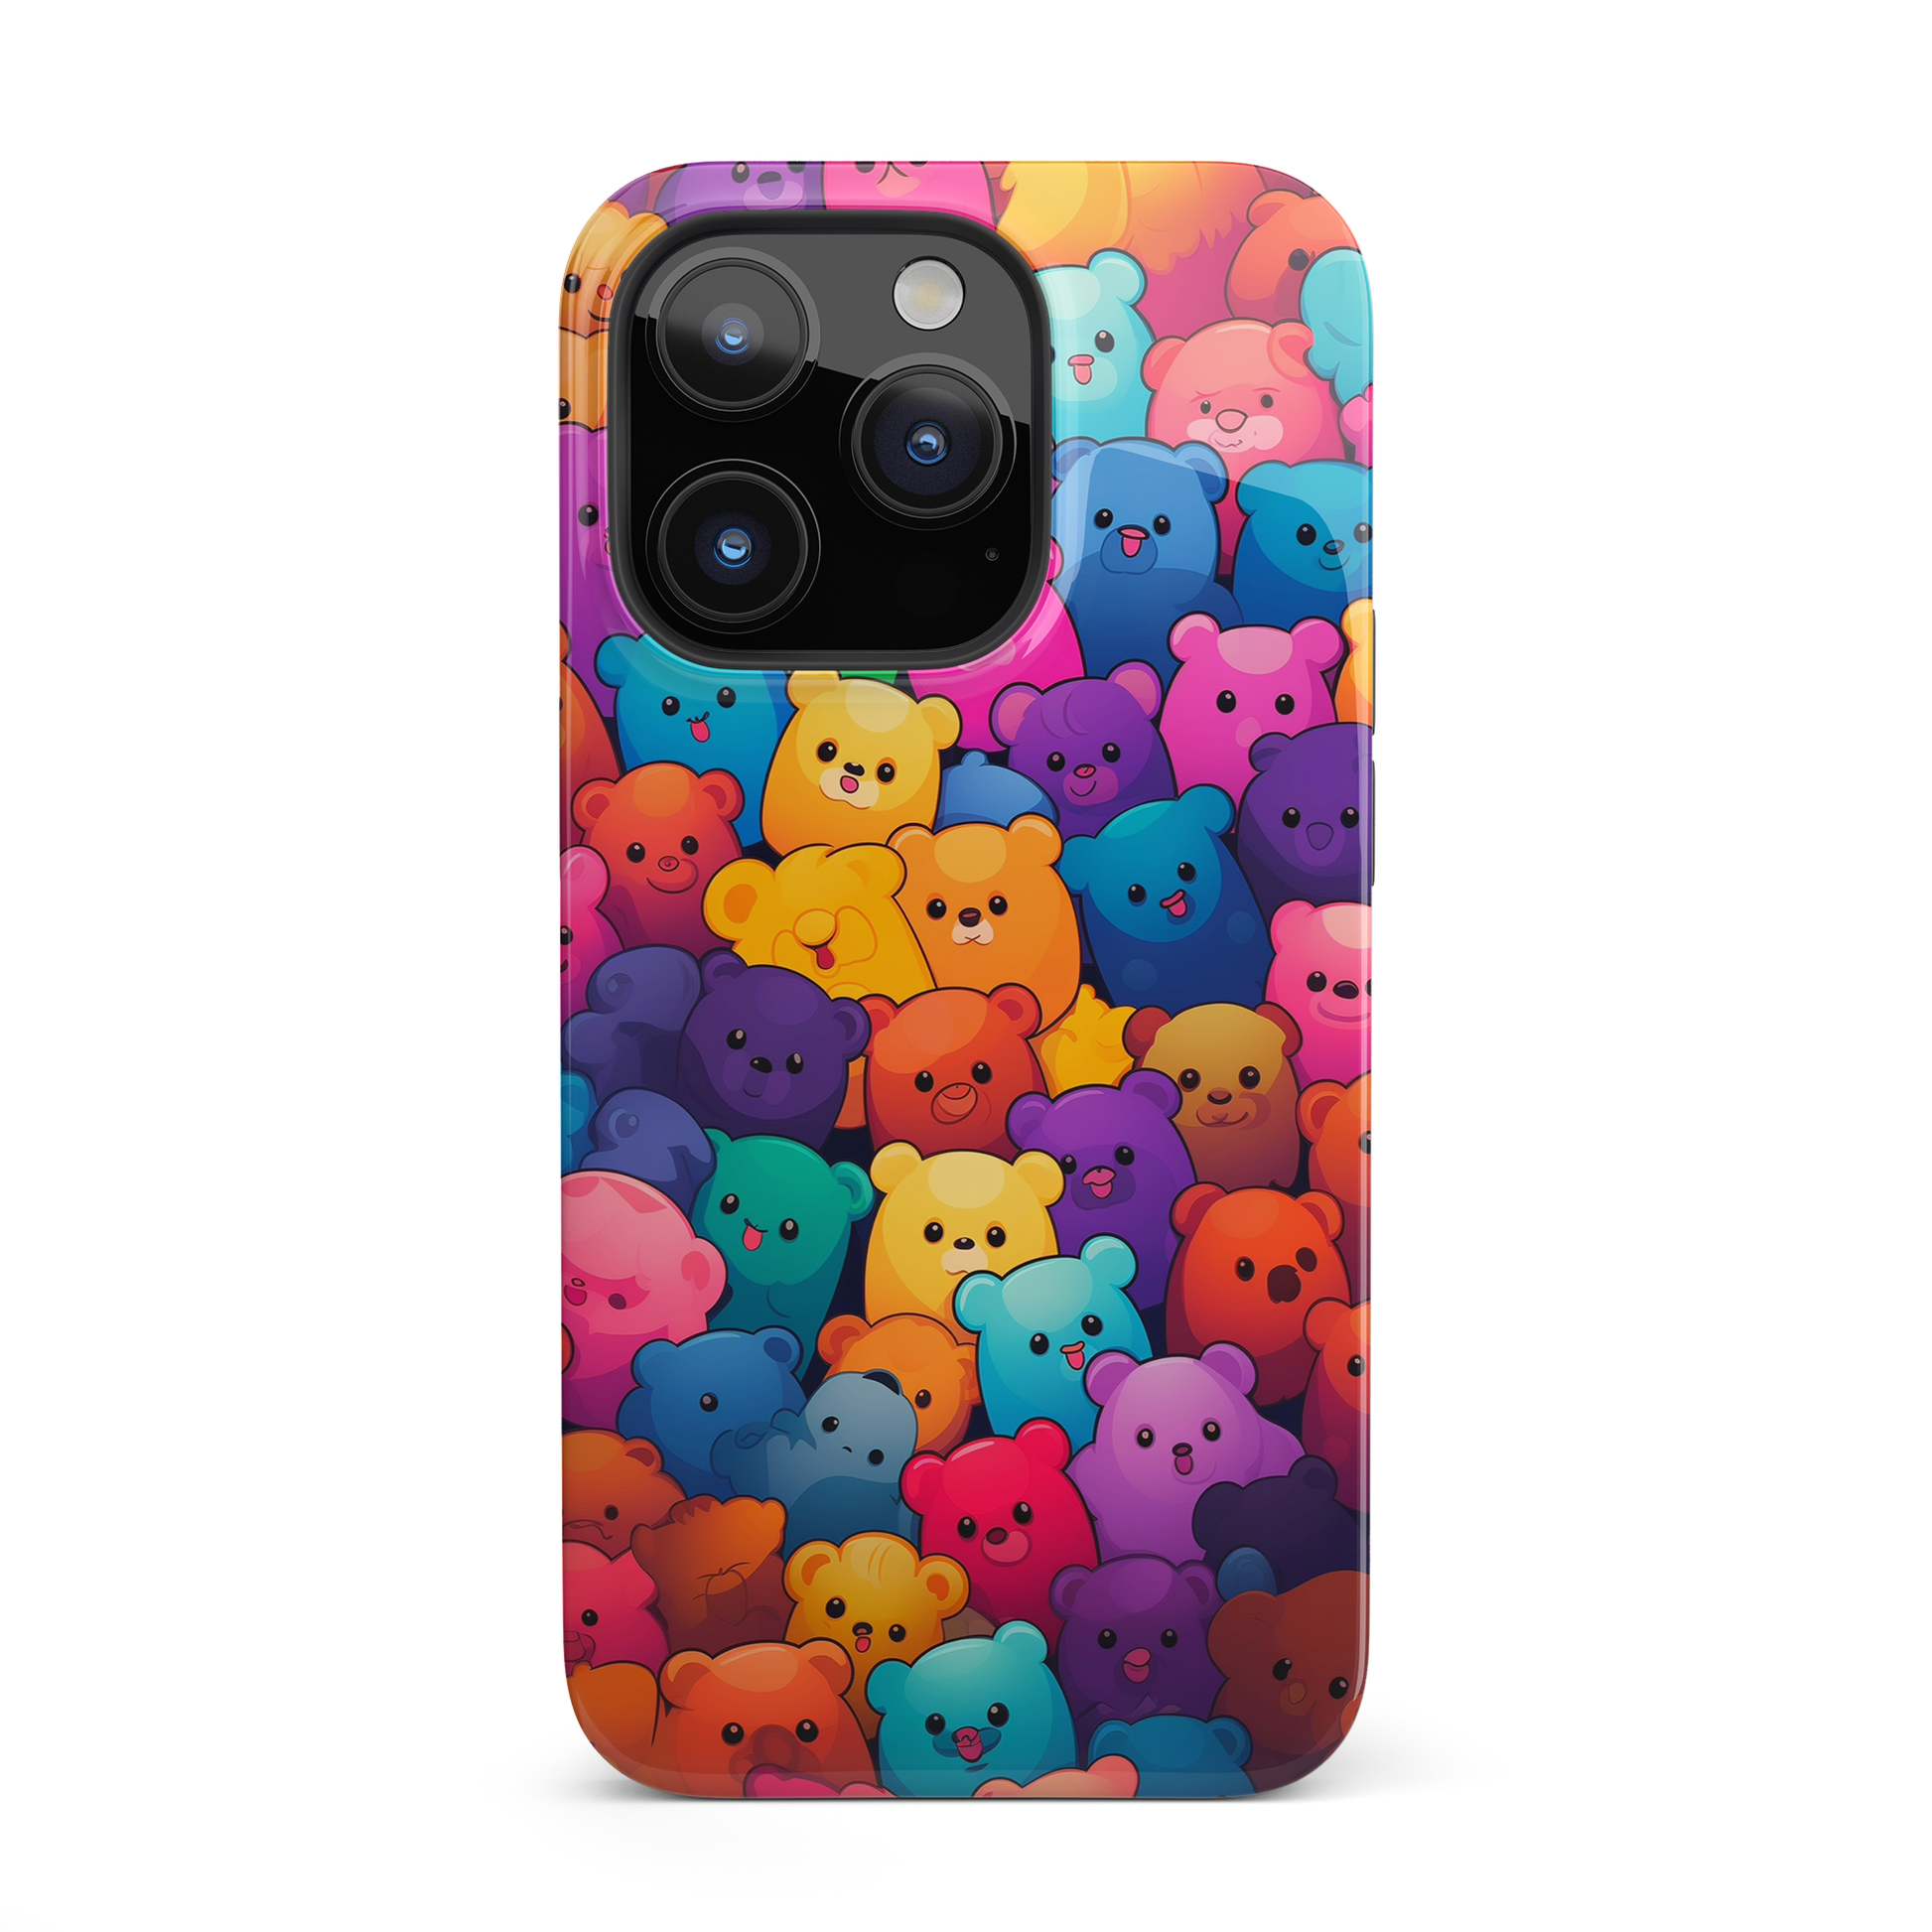 Rainbow Bear Bliss (iPhone MagSafe Case)Rainbow Bear Bliss MagSafe Durable Case: Style Meets Protection 📱✨
Upgrade your device with Rima Rainbow Bear Bliss MagSafe Durable Case. This case isn’t just aboutRimaGallery